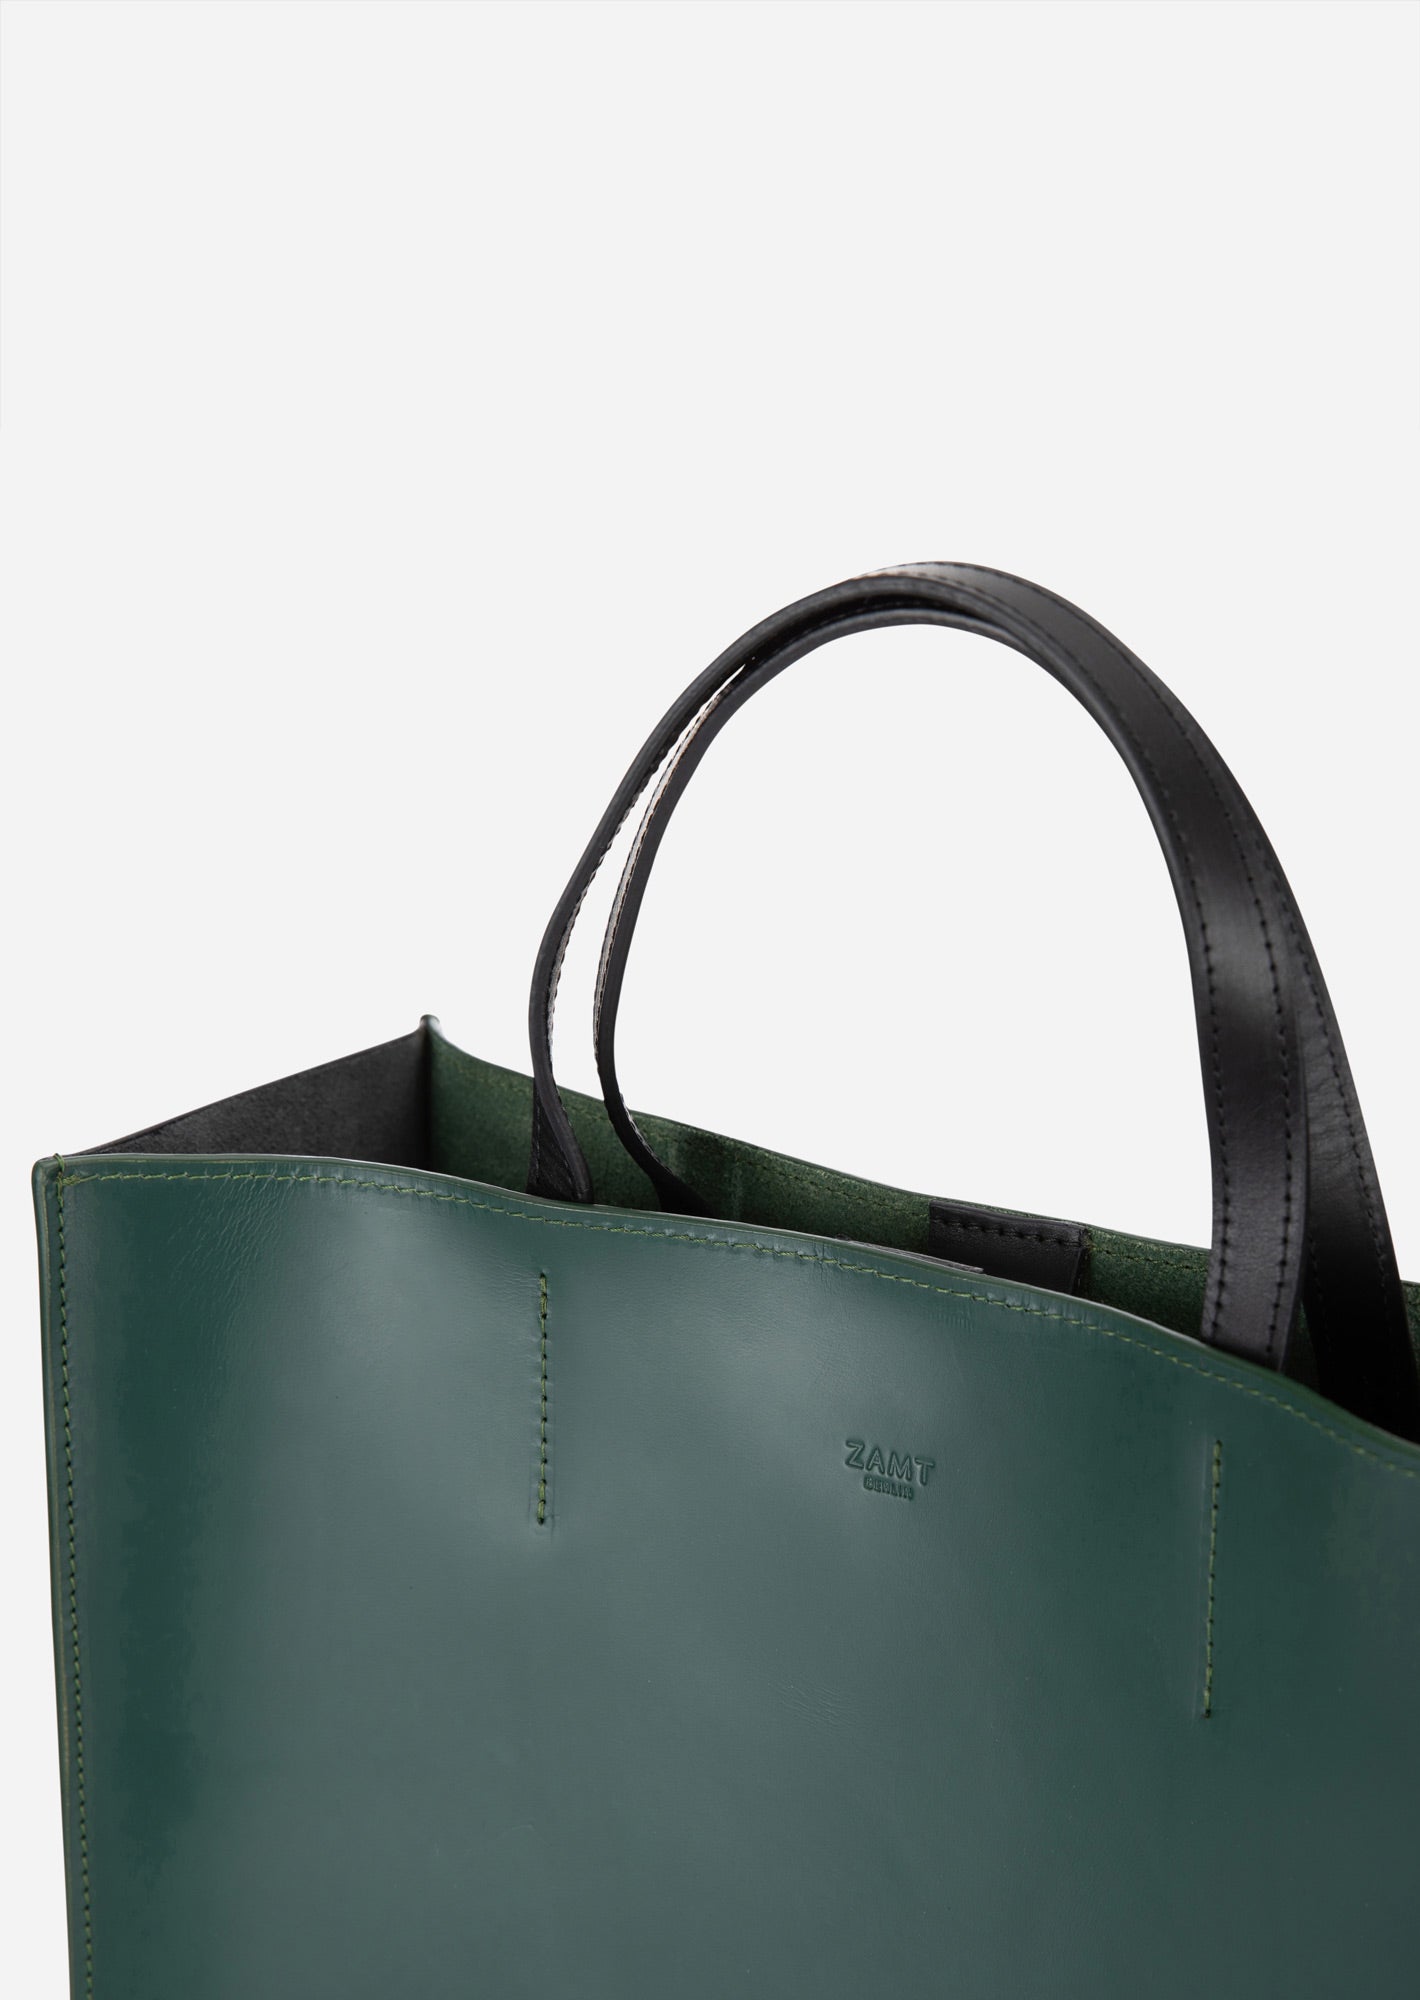 CONTAINER_BAG_FINCH_GREEN_Designed_in_Berlin_Made_to_last_Handmade_in_Poland.